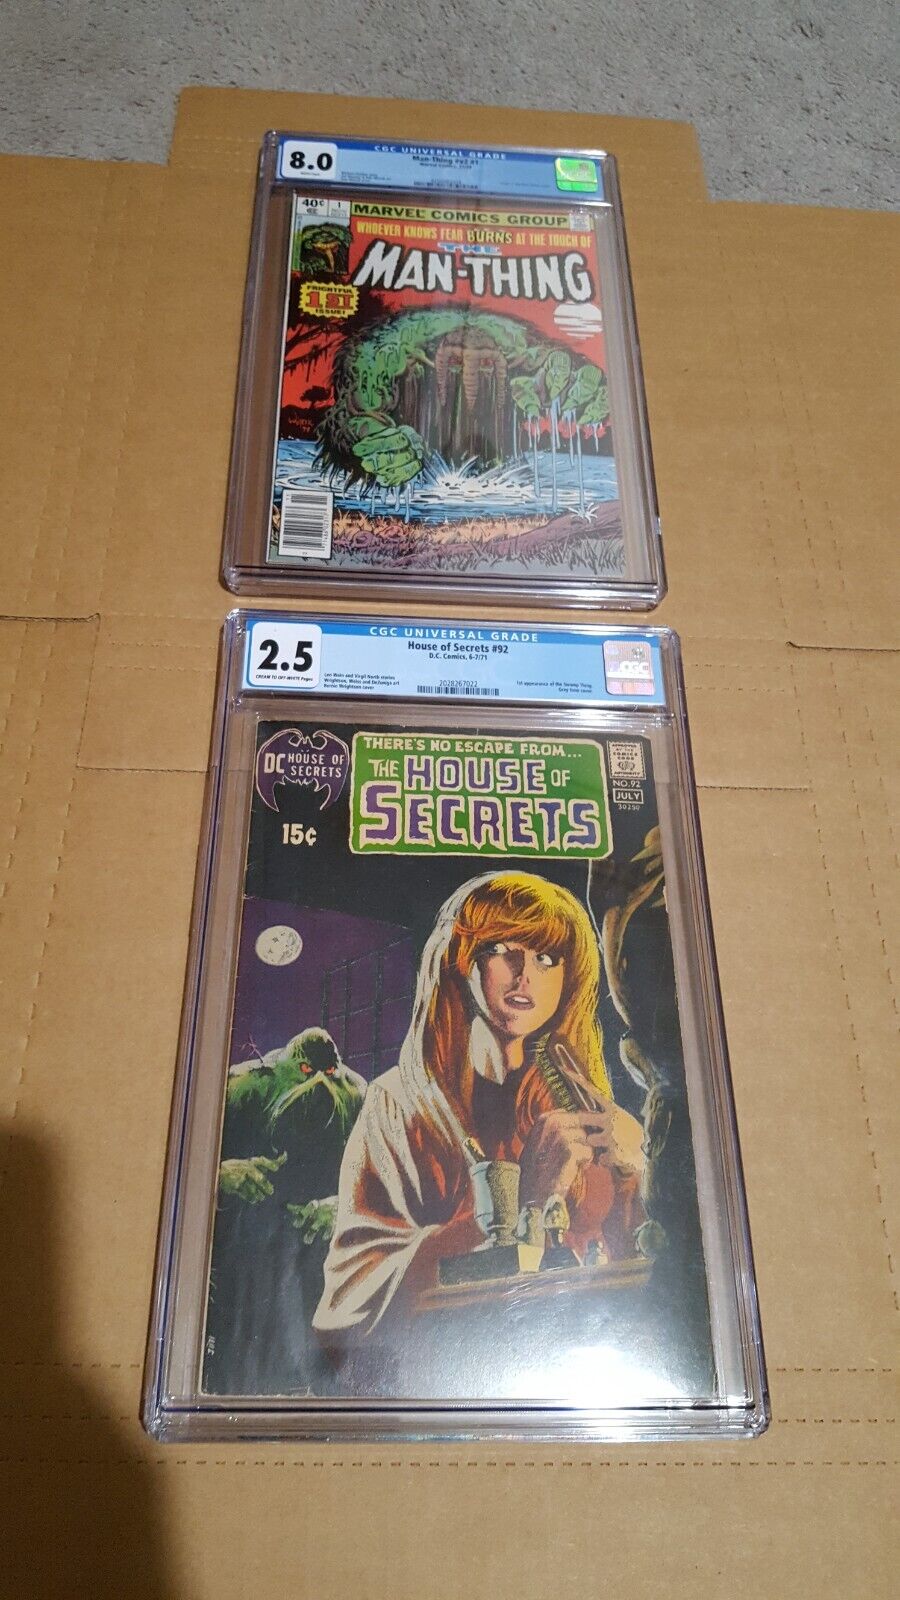 THE HOUSE OF SECRETS #92 CGC 2.5 C/O-W THE MAN-THING #V2 #1 CGC 8.0 WHITE PAGES